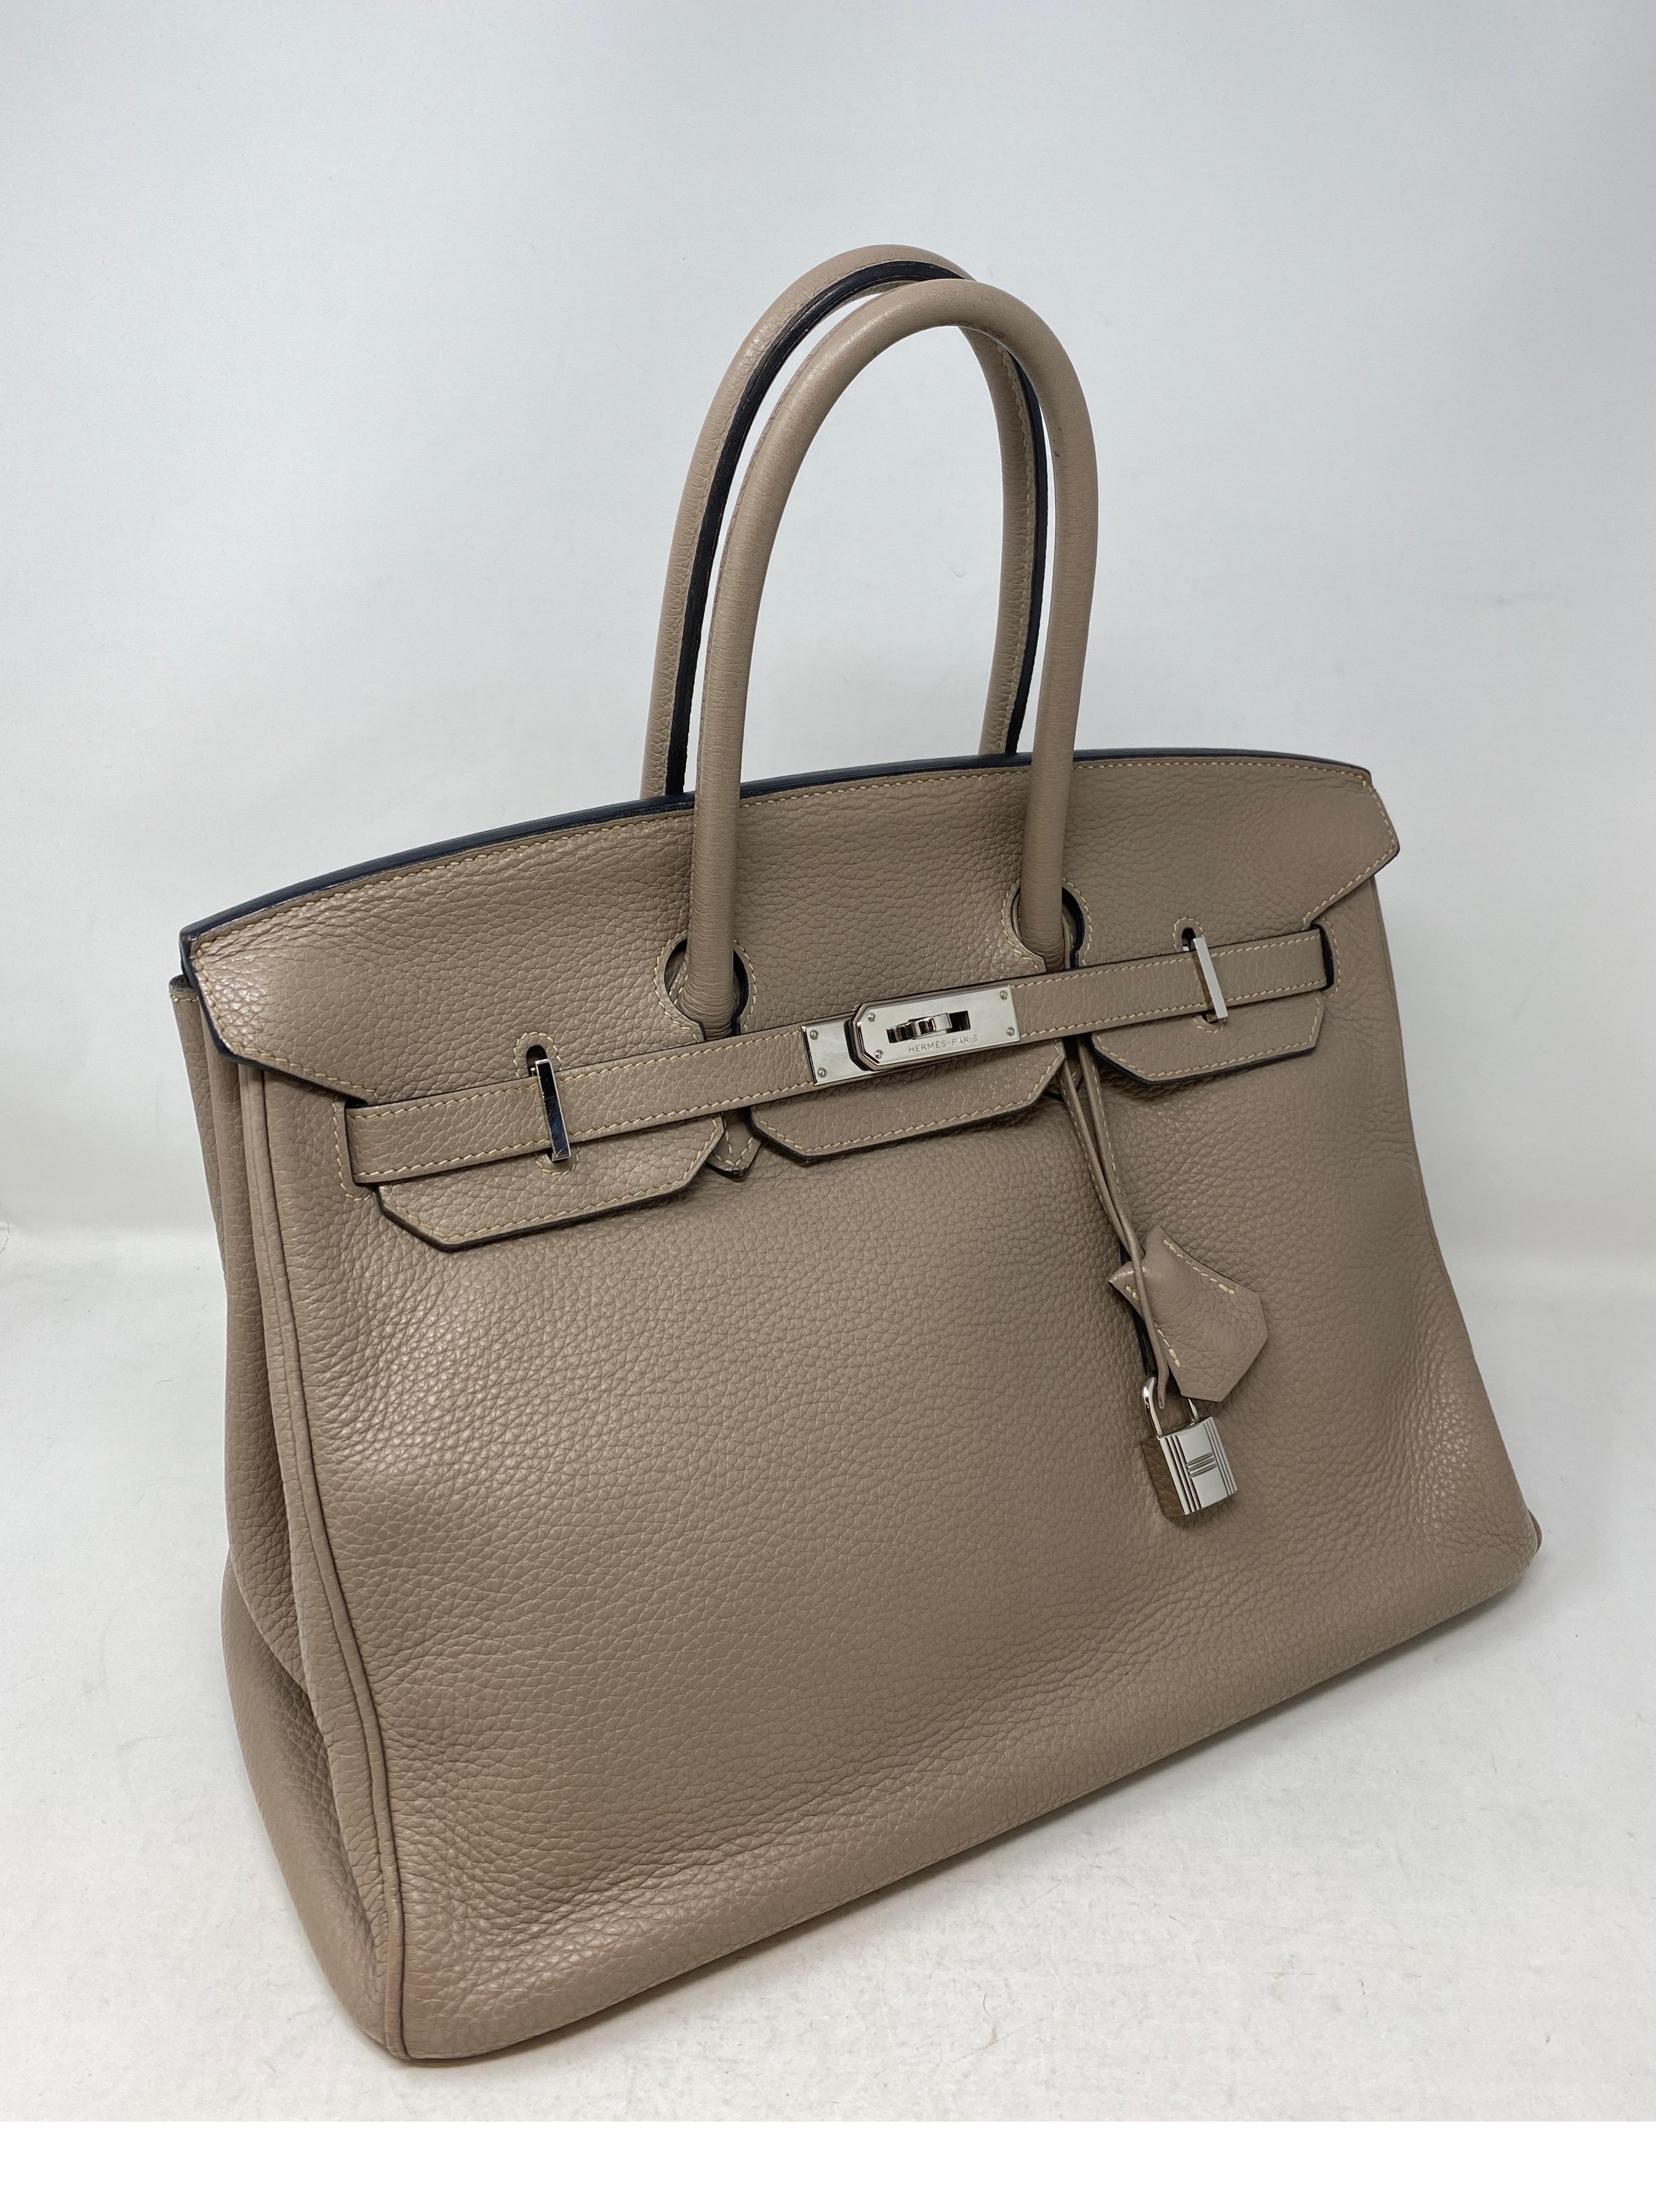 Hermes Gris Birkin 35 Bag. Good condition. Hard to find light grey color. Palladium hardware. A great neutral color. Includes clochette, lock, keys, and dust cover. Guaranteed authentic. 